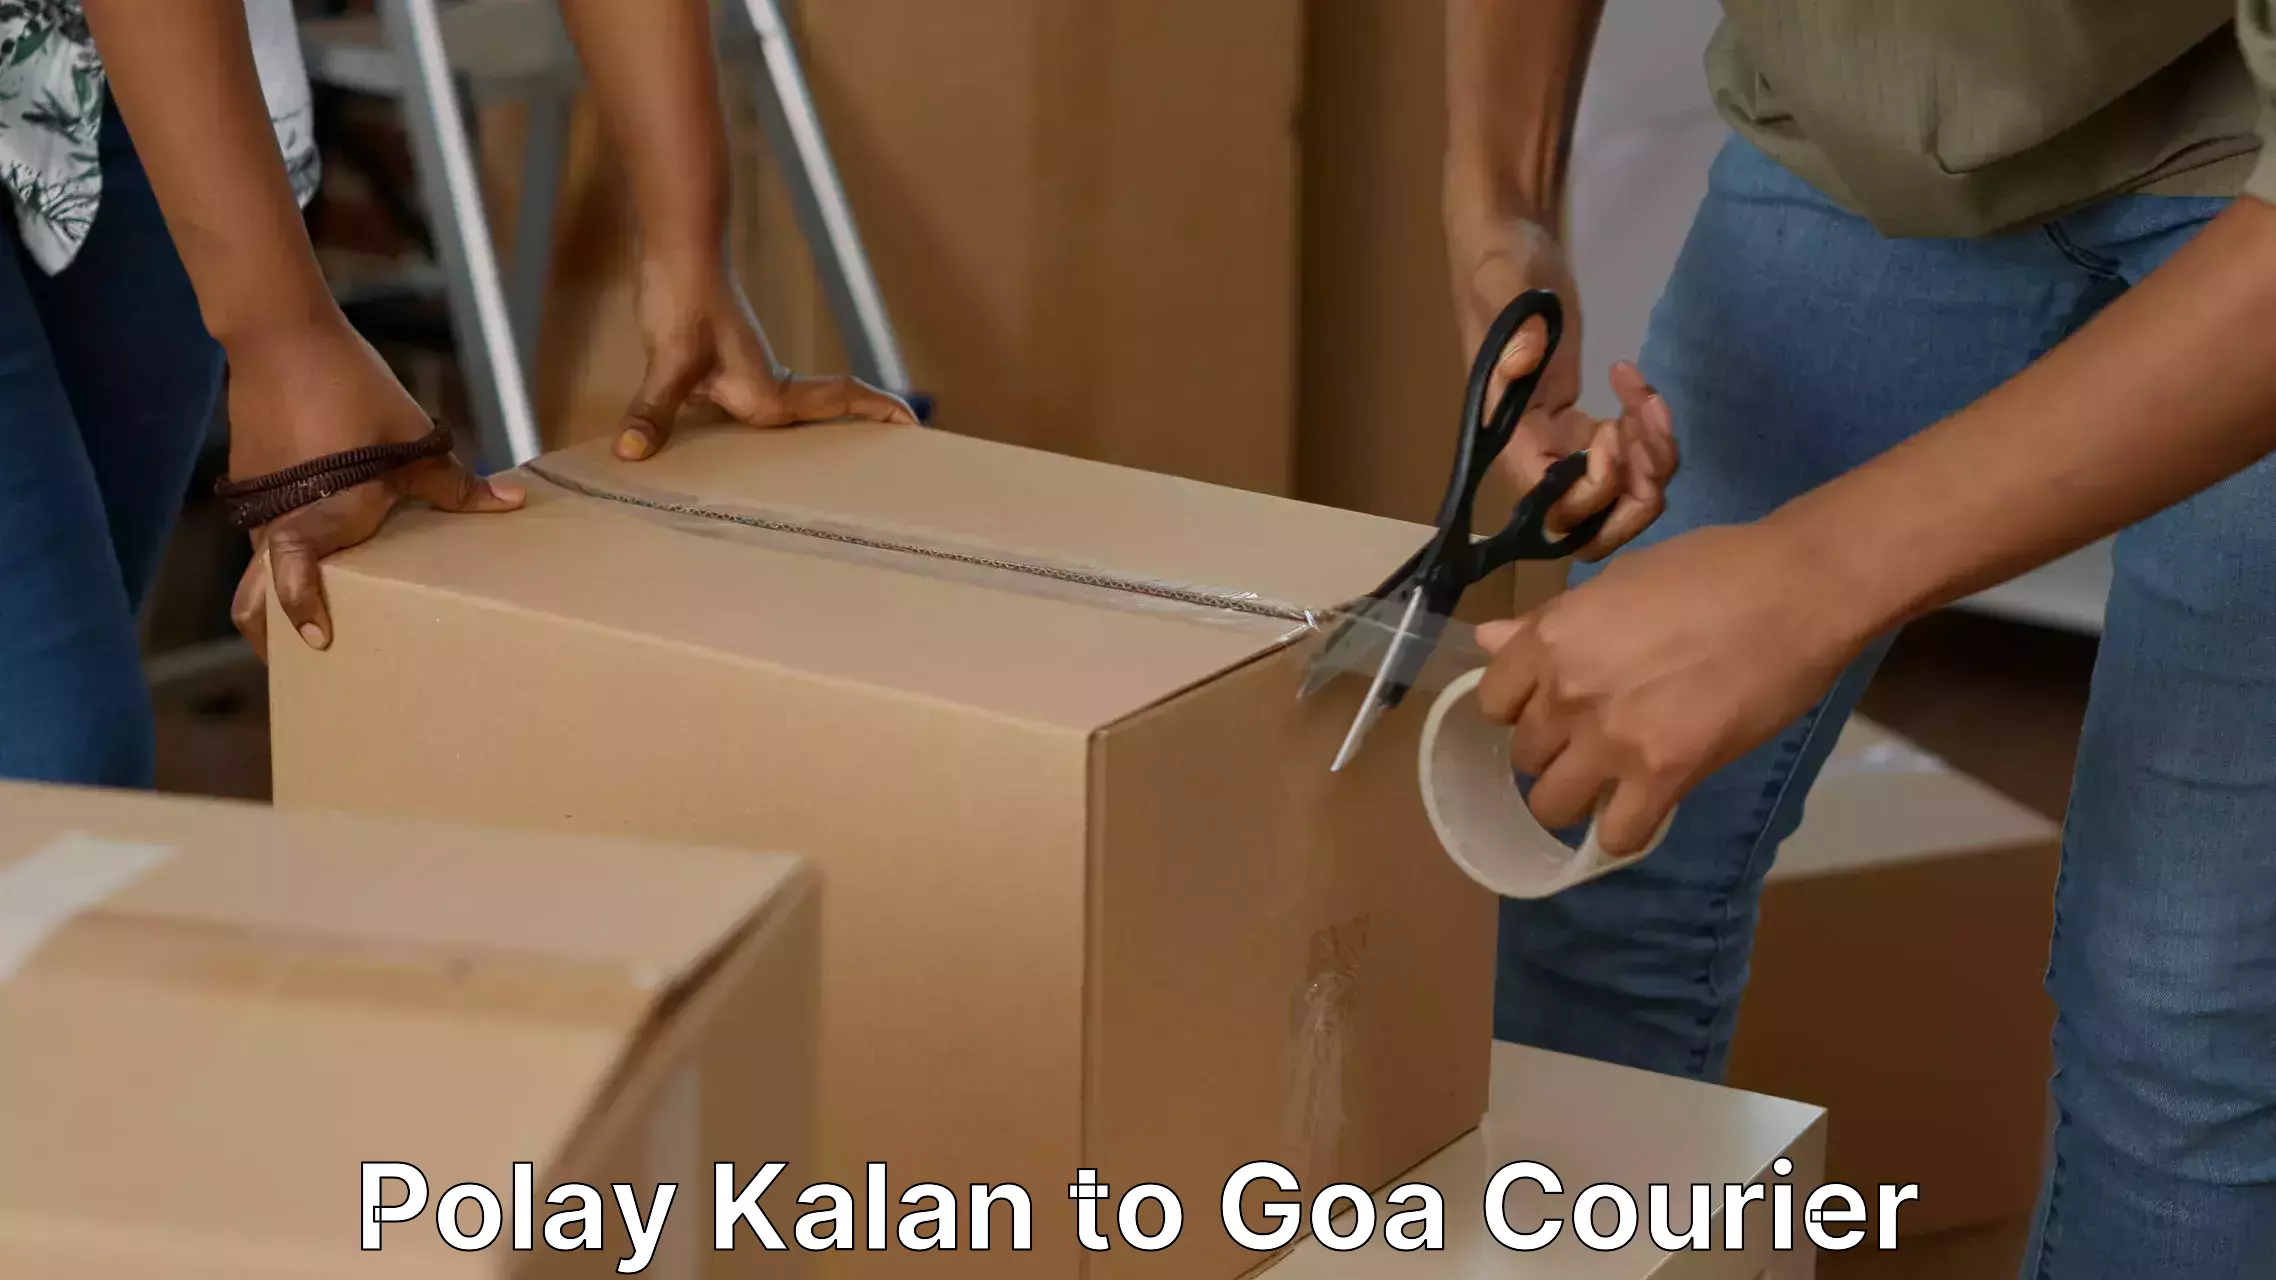 Cost-effective moving options Polay Kalan to IIT Goa